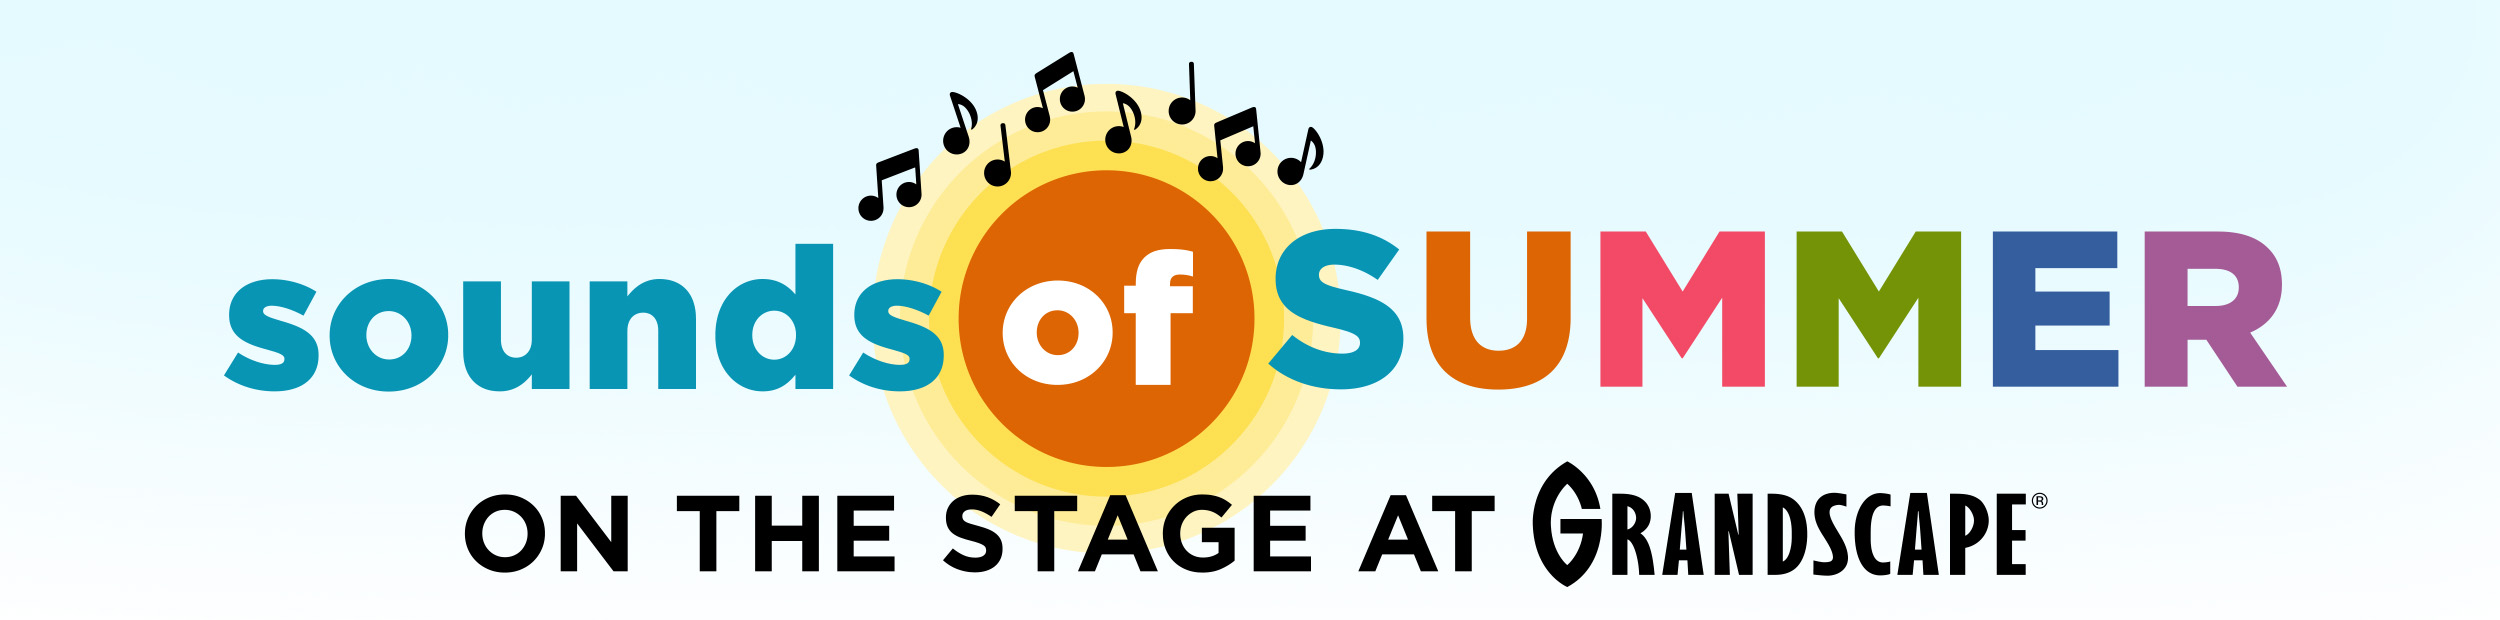 Sounds of Summer on the stage at Grandscape